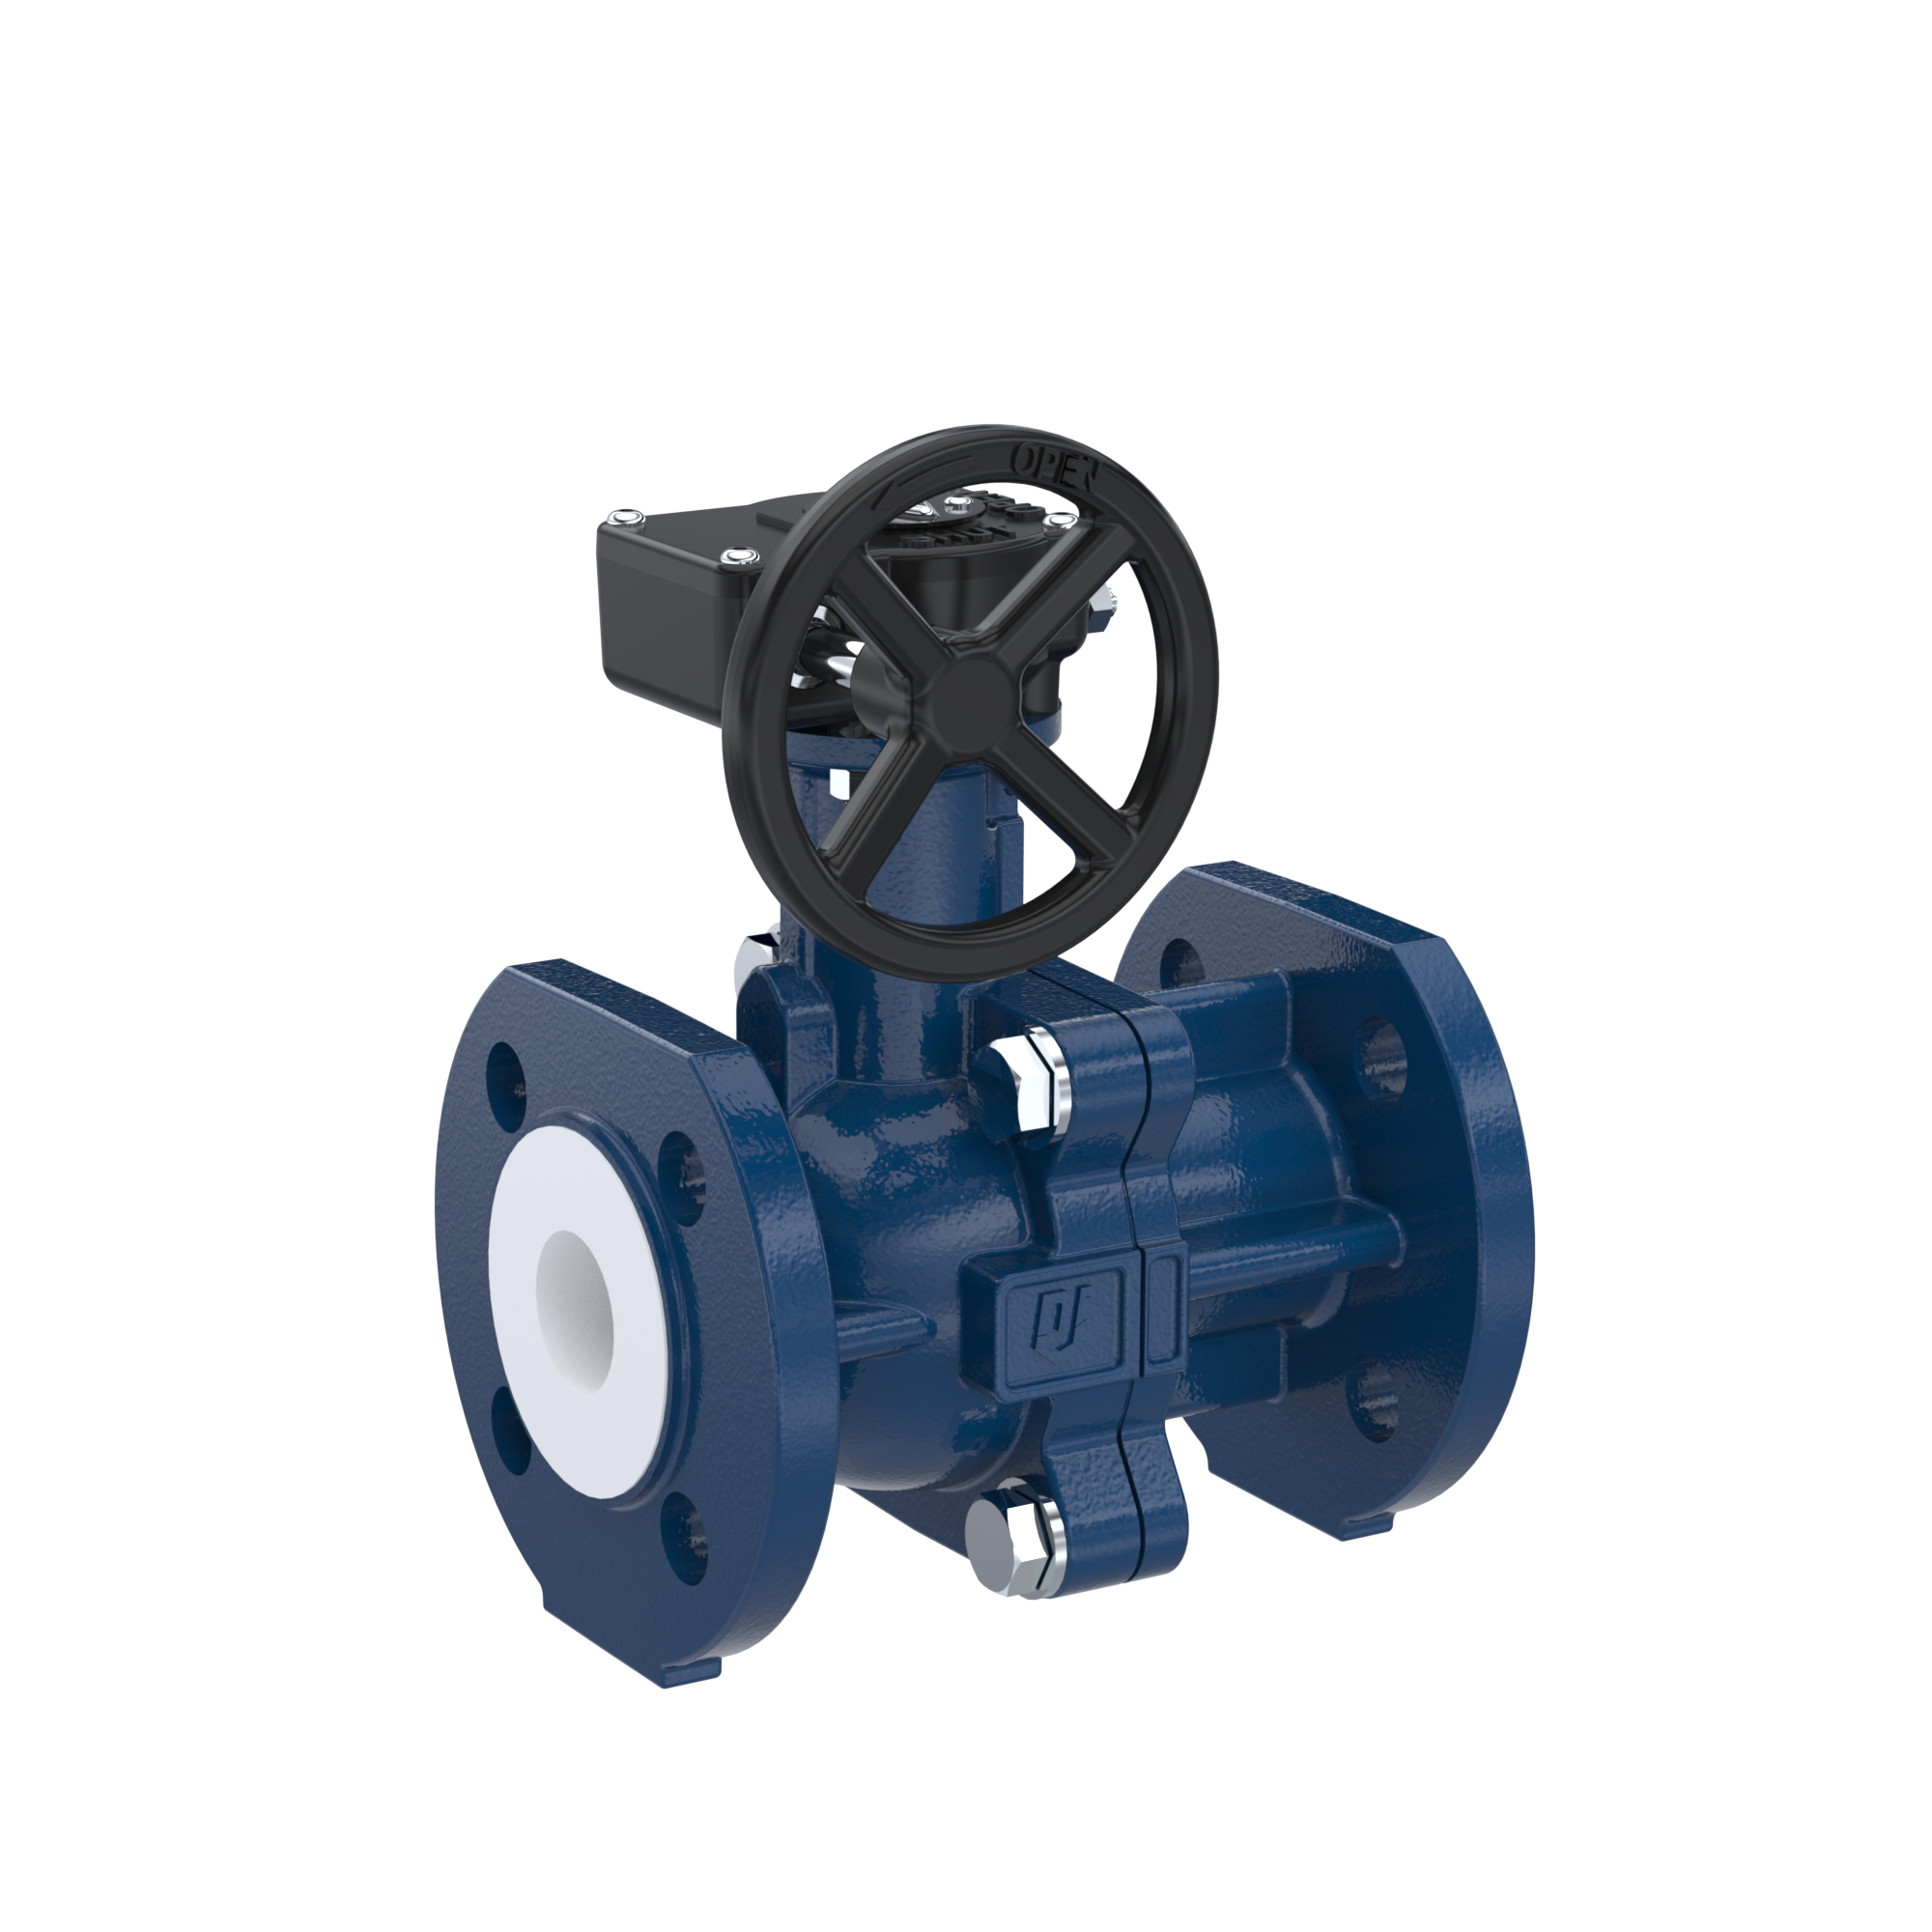 PFA-flange ball valve FK13 DN20 - 3/4" inch PN10/16 made of spheroidal graphite cast iron with worm gear